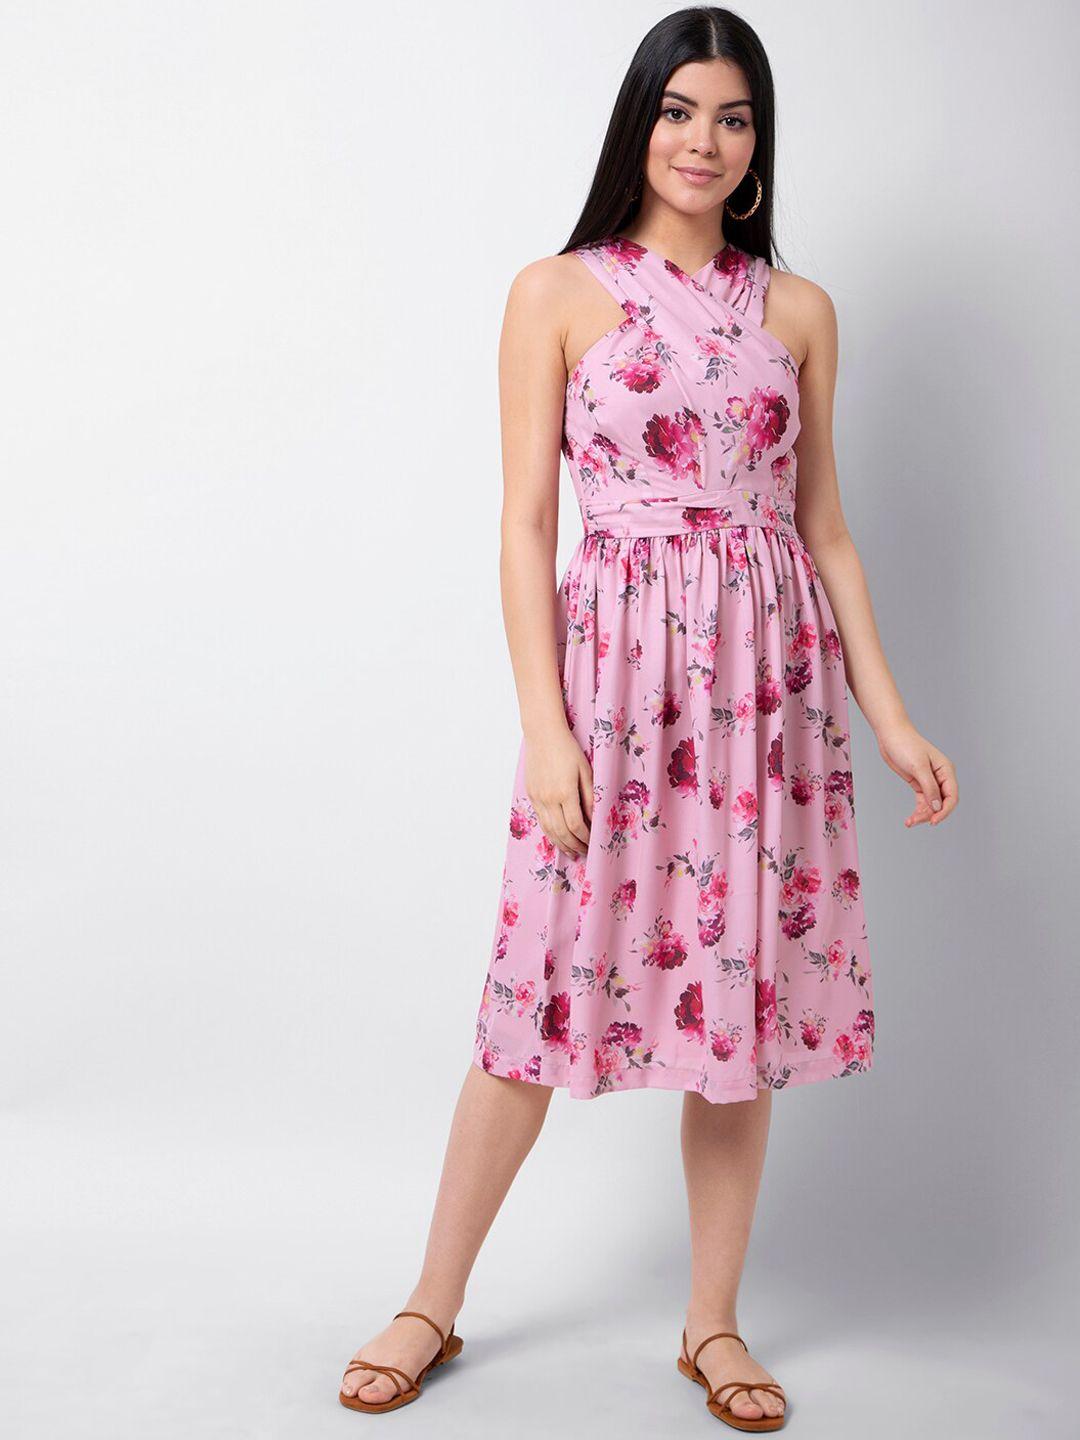 faballey women pink floral printed fit and flare dress